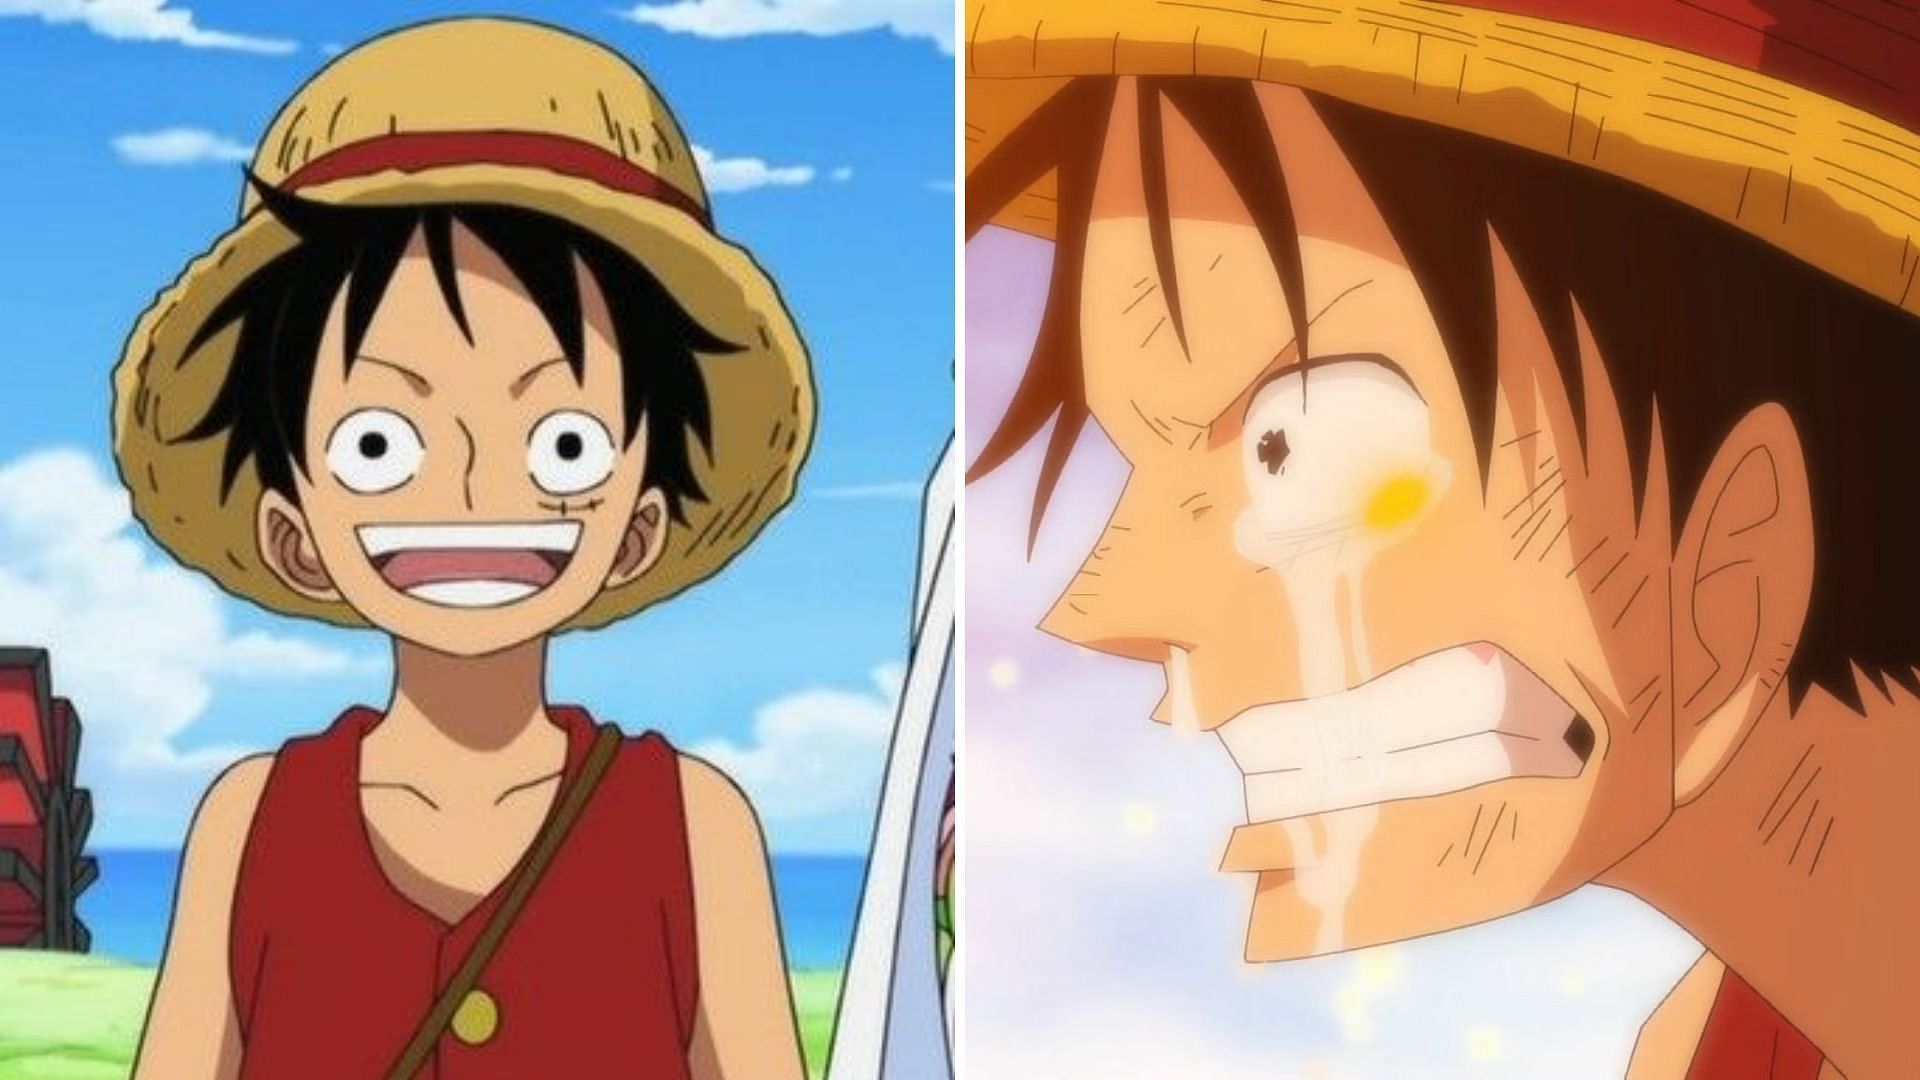 Luffy from the One Piece series (Image via Studio Toei Animation)